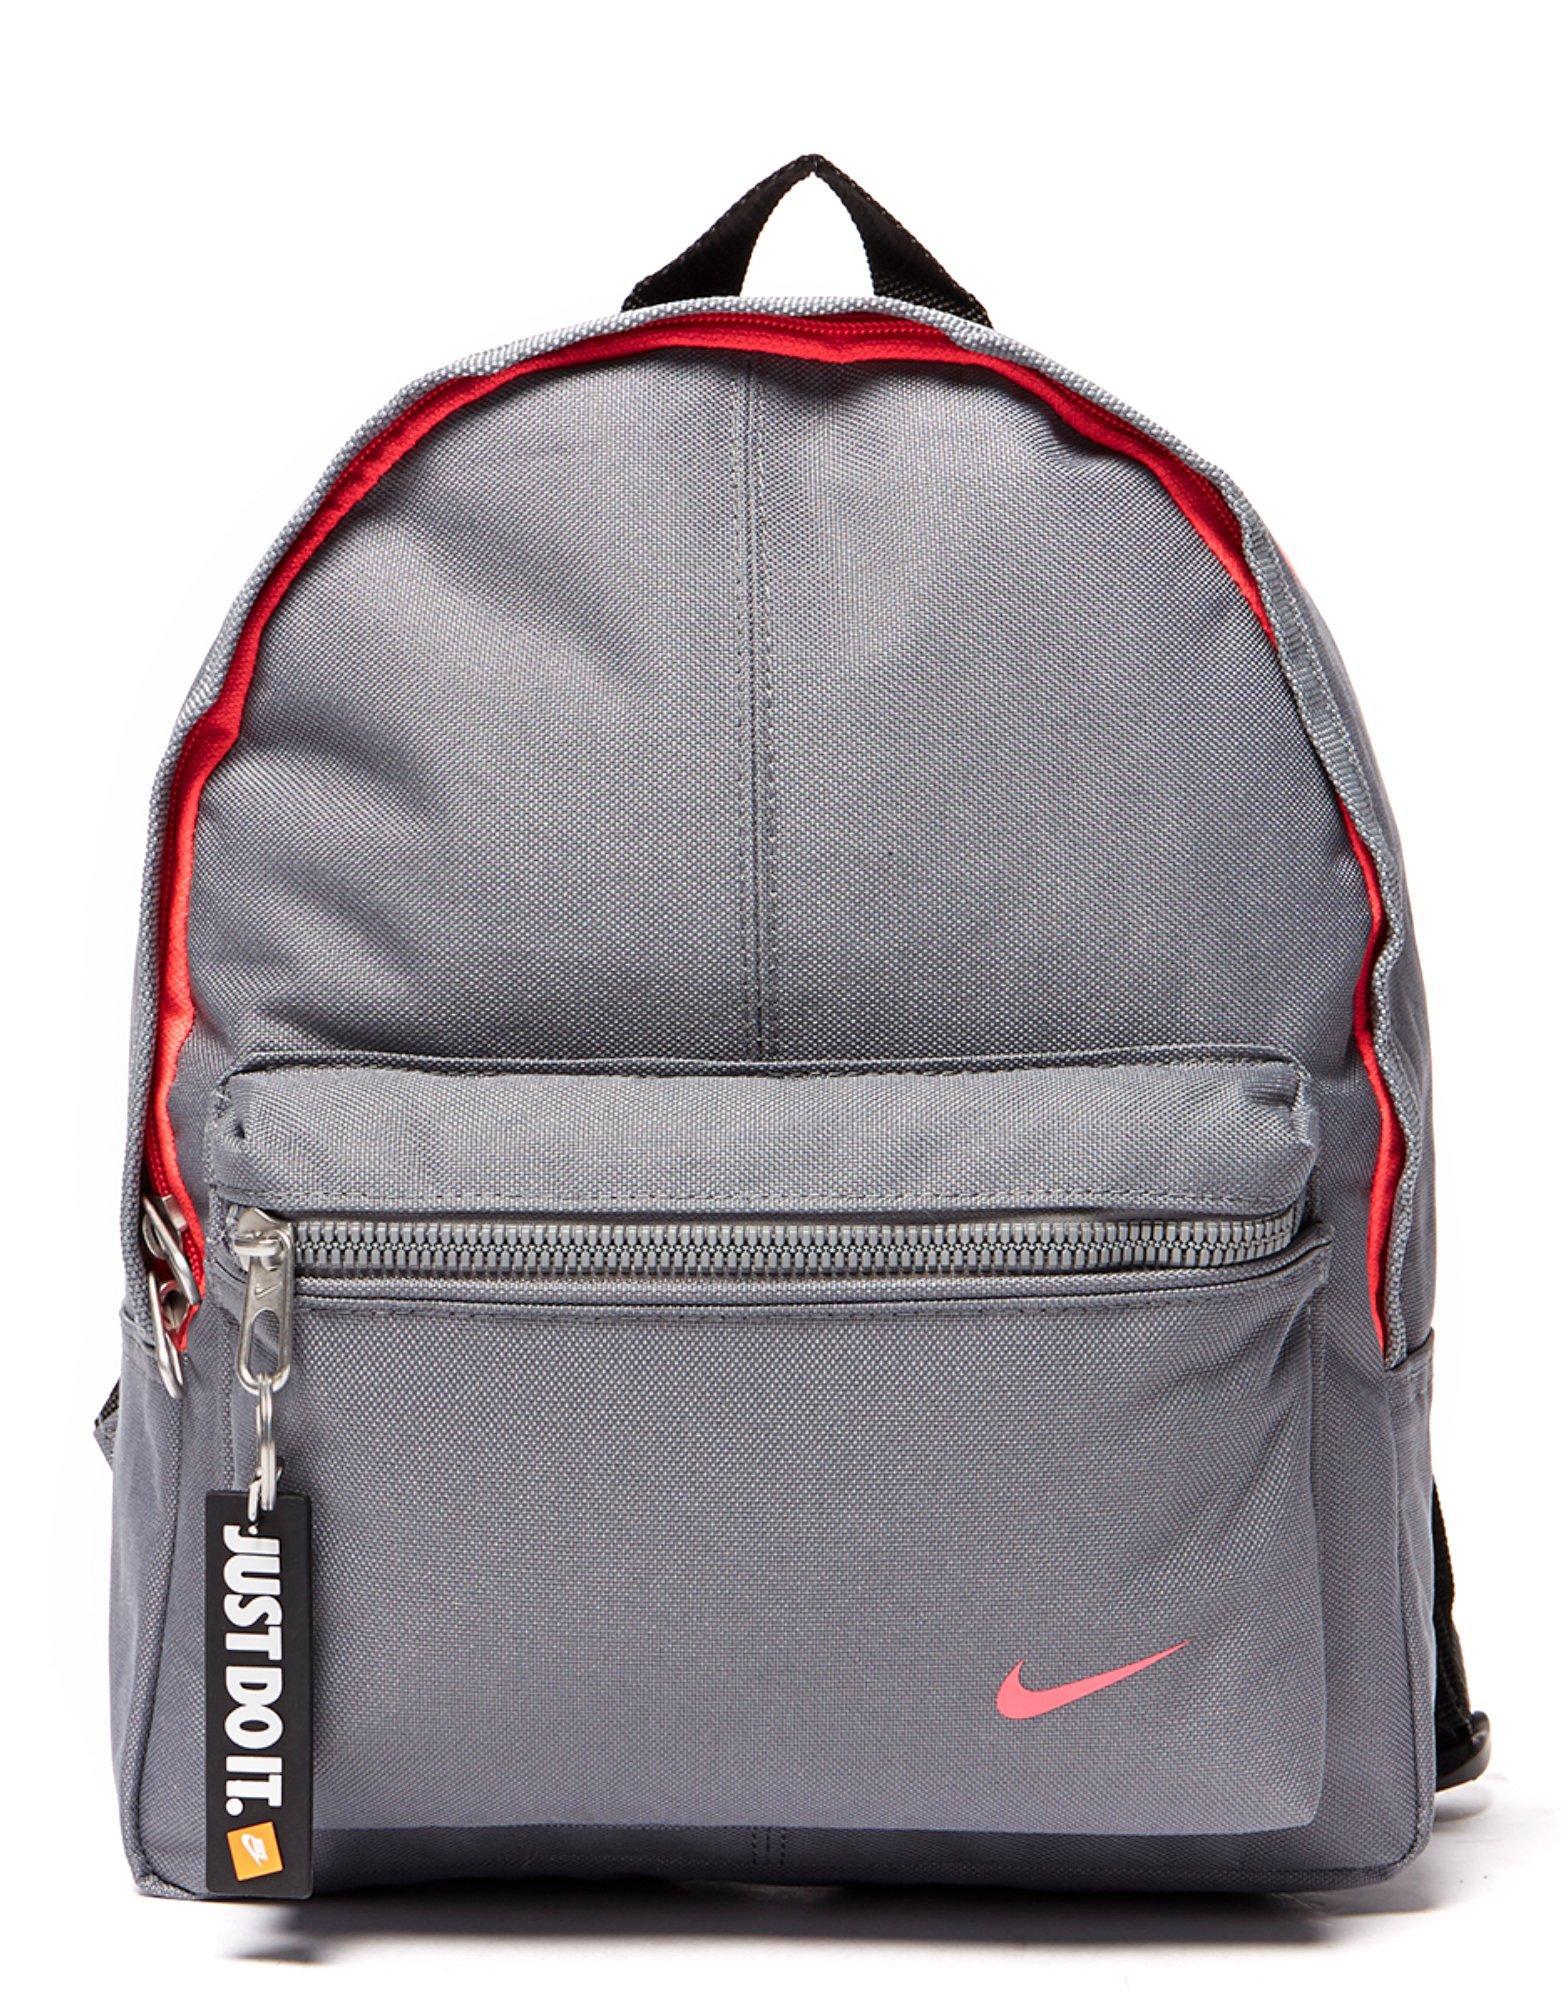 Lyst - Nike Classic Mini Backpack in Gray for Men